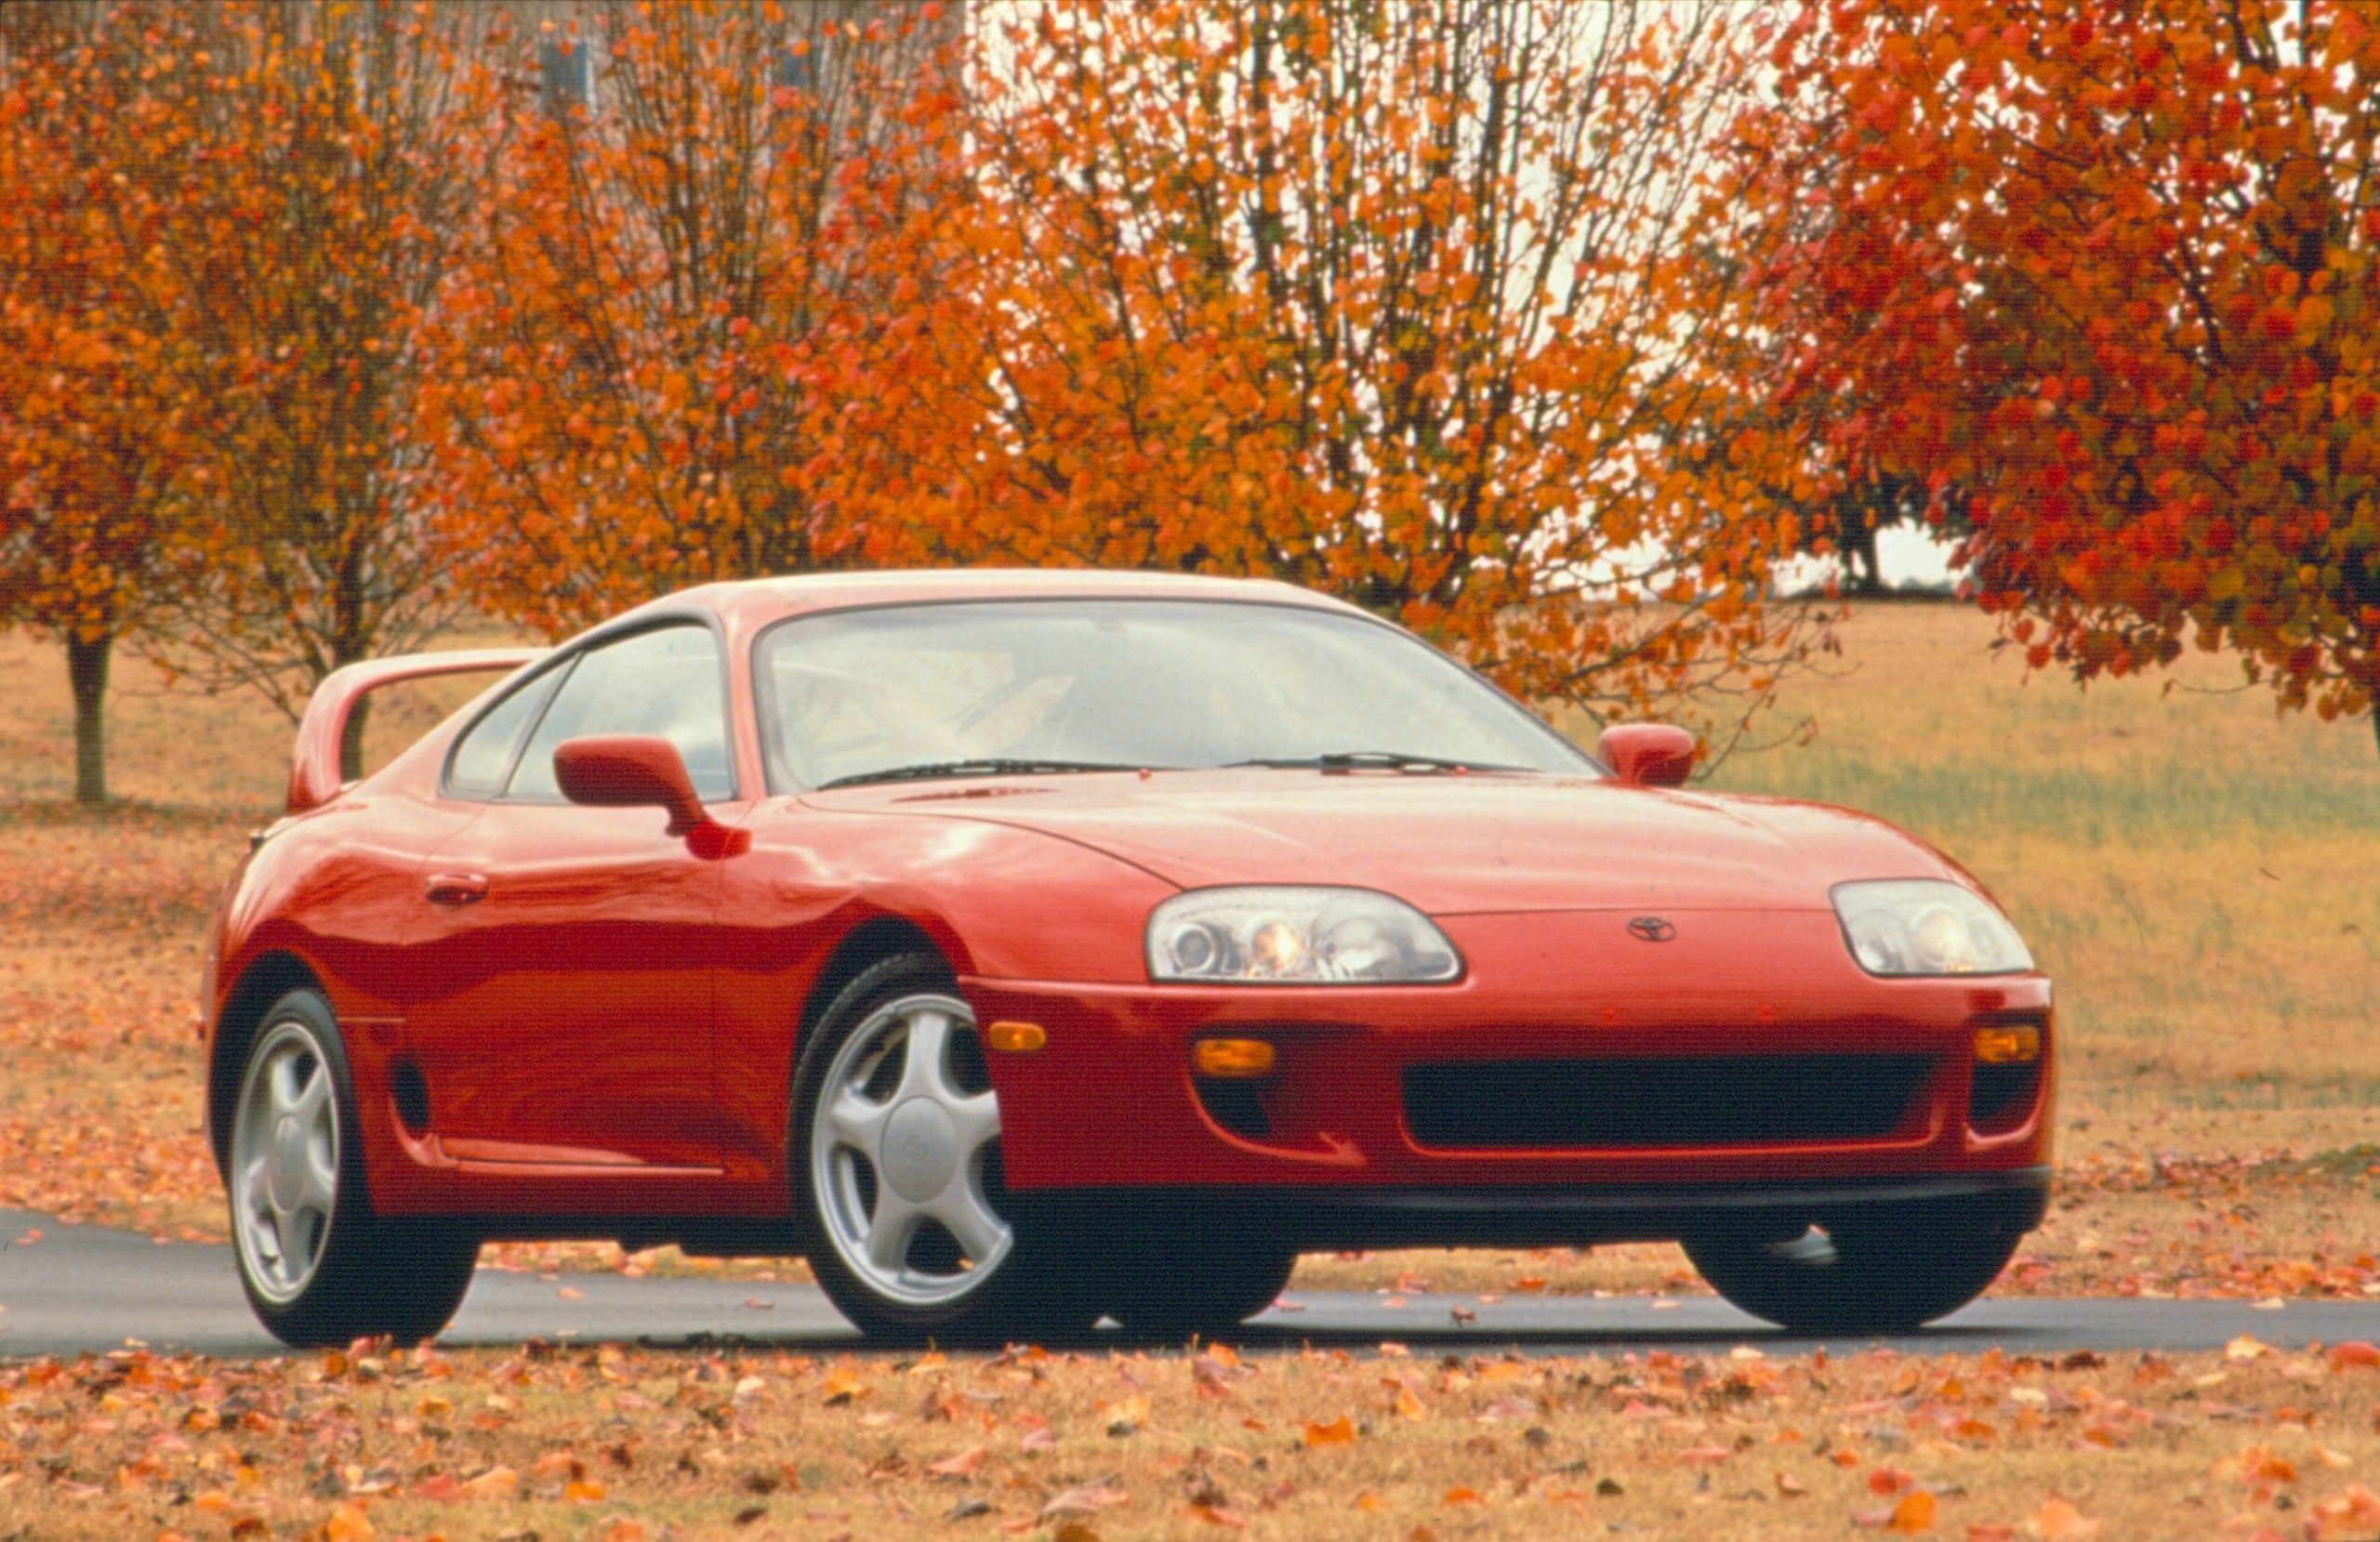 A red 1994 Toyota Supra among the fall leaves